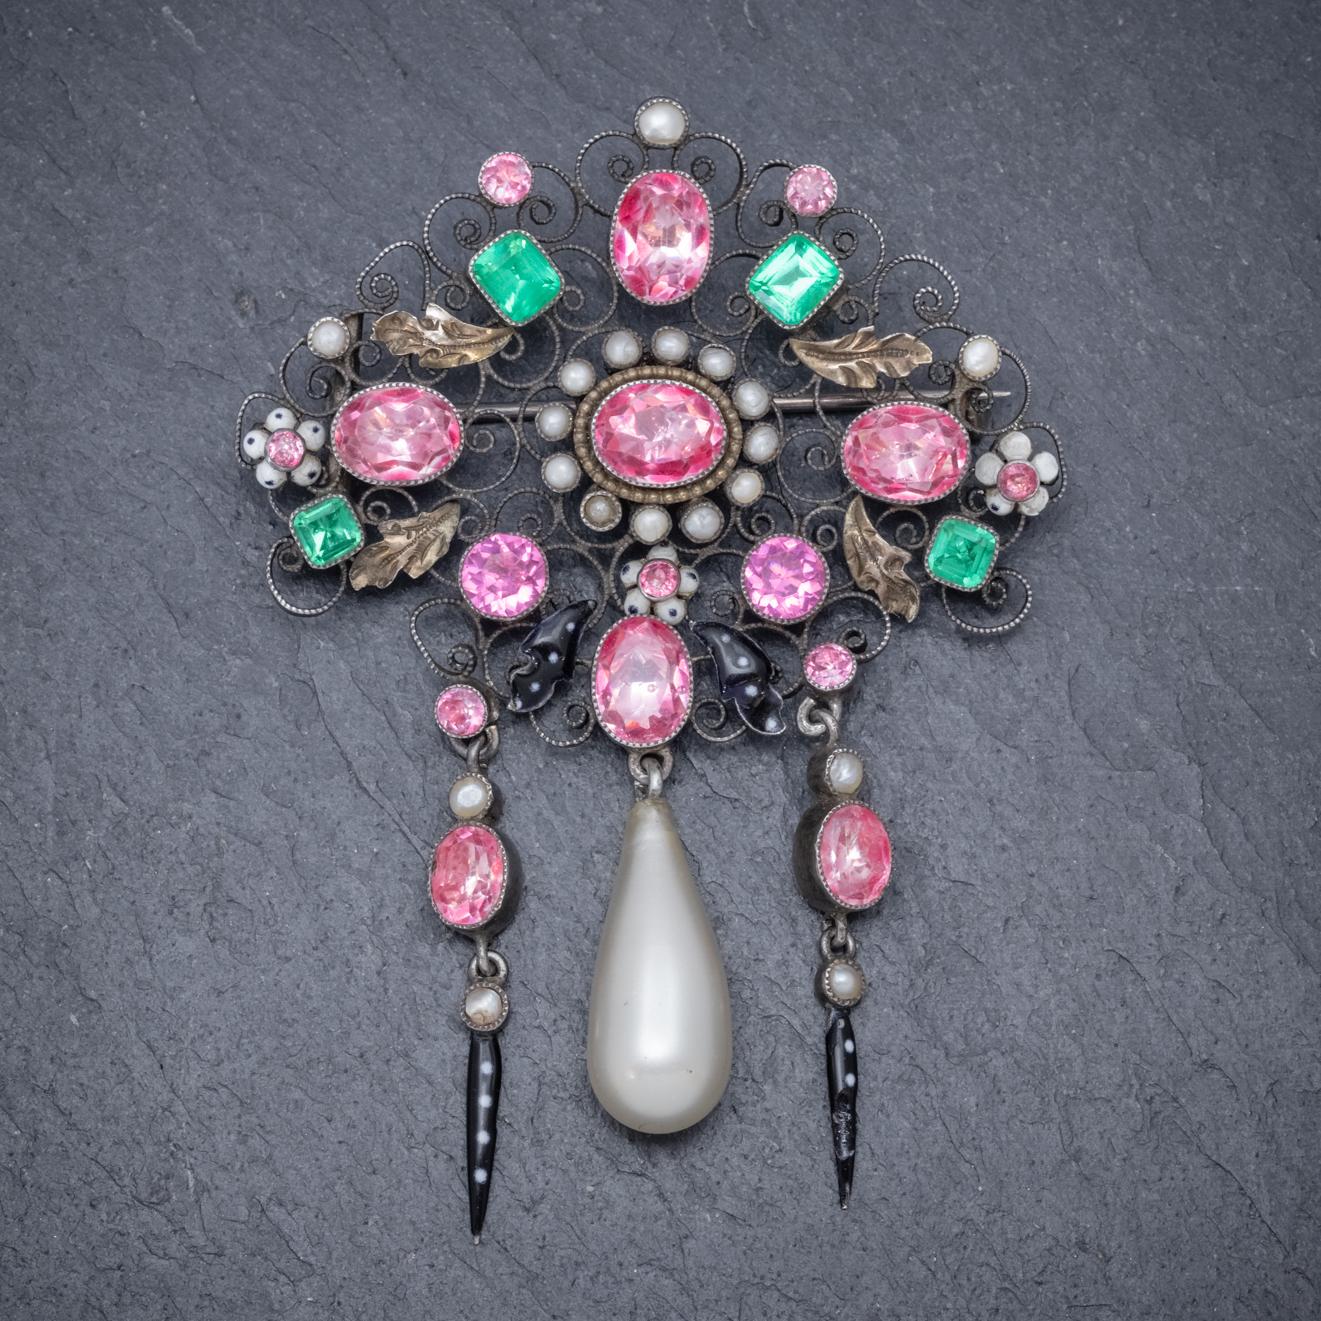 An exquisite antique Edwardian brooch decorated with pink and green Paste Stones and white Pearls which together represent the colours of the Suffragette movement which took place in the early 20th century. 

The stunning gallery has a beautiful